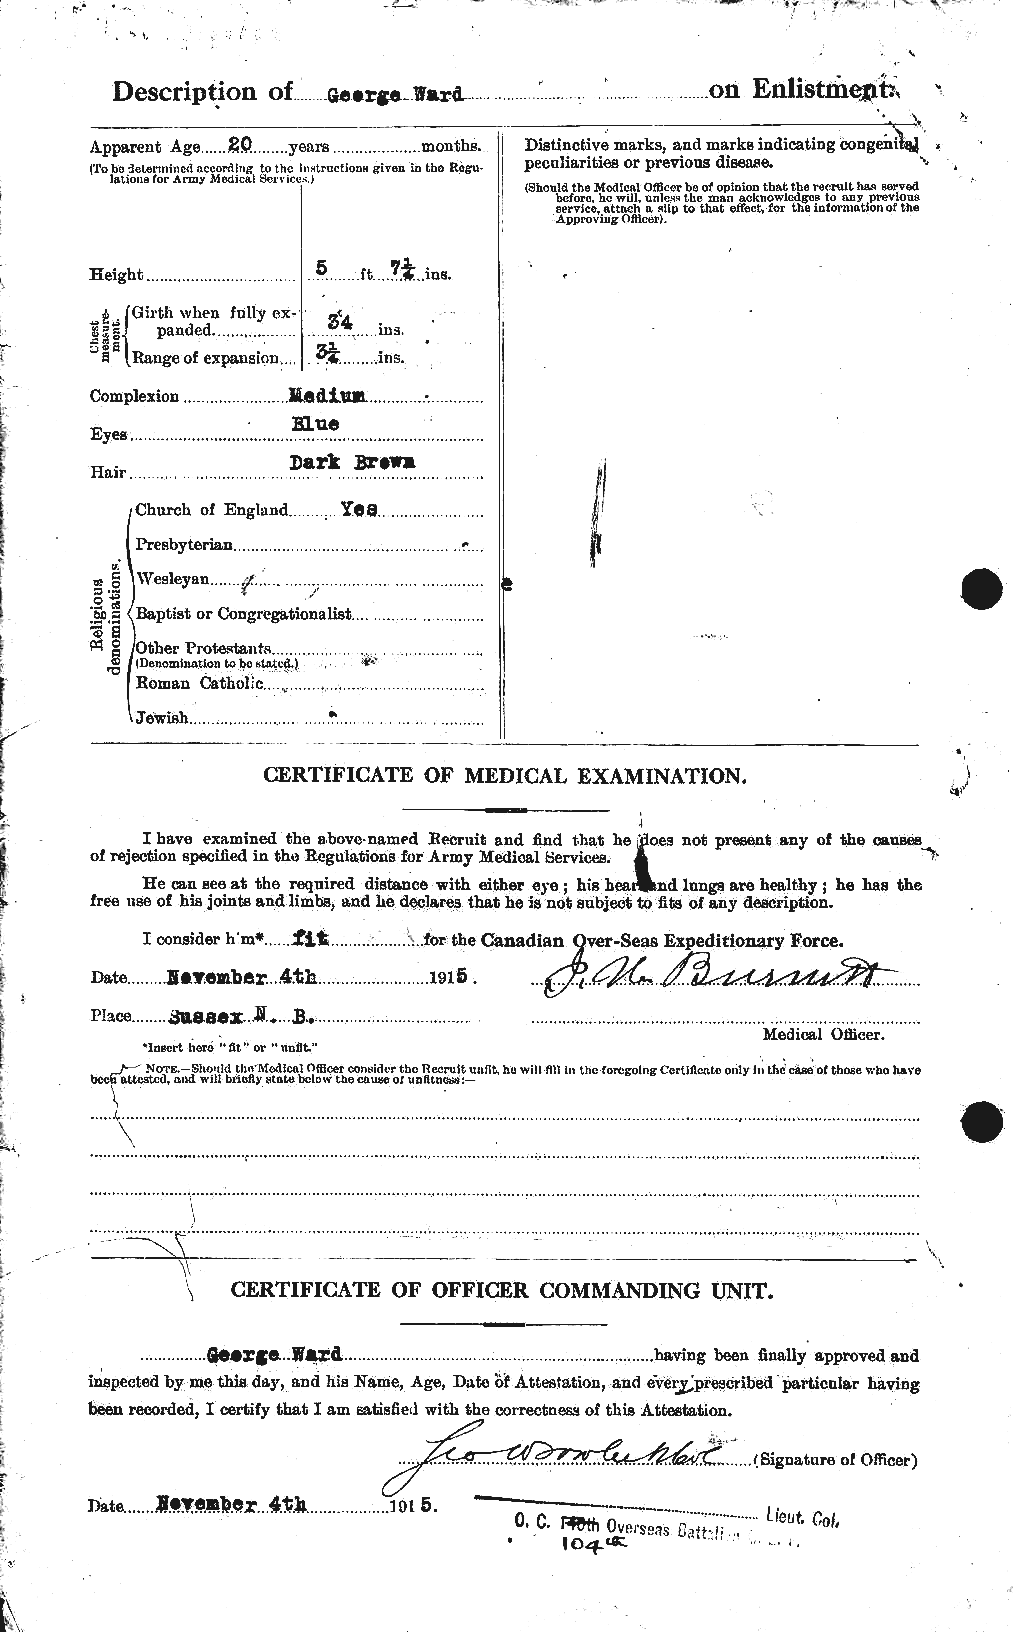 Personnel Records of the First World War - CEF 657762b